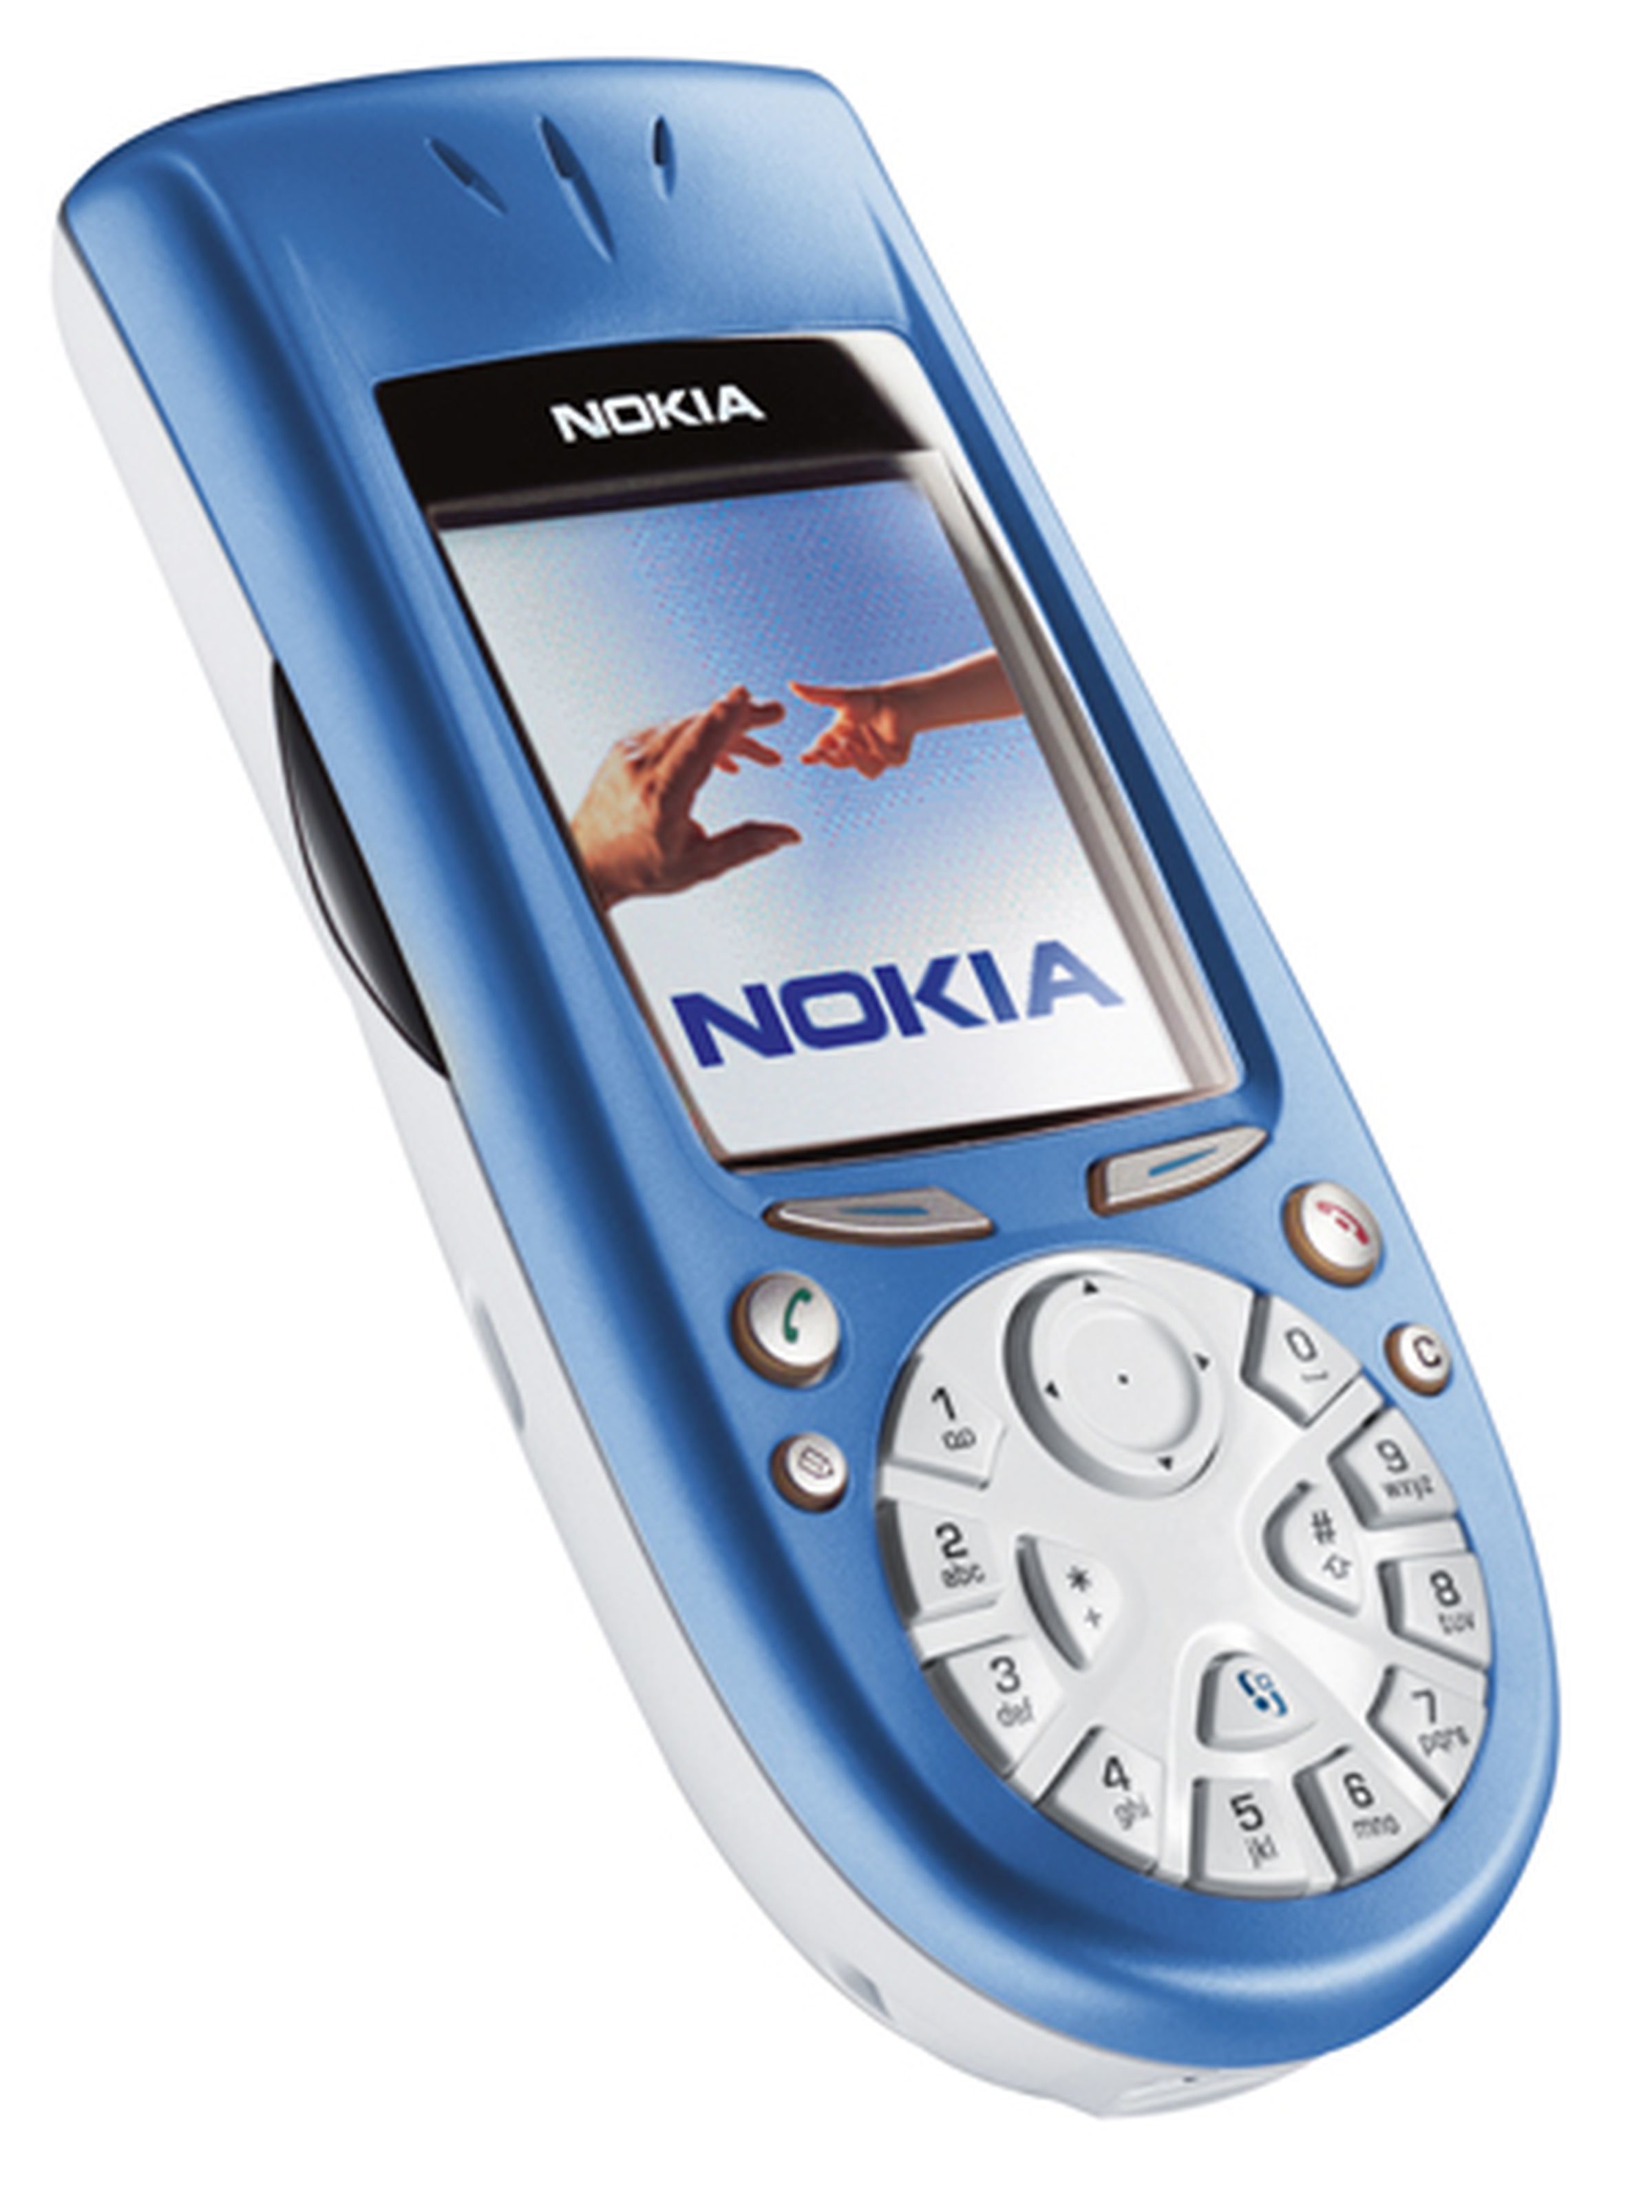 The Nokia 3650. This was not a good idea.